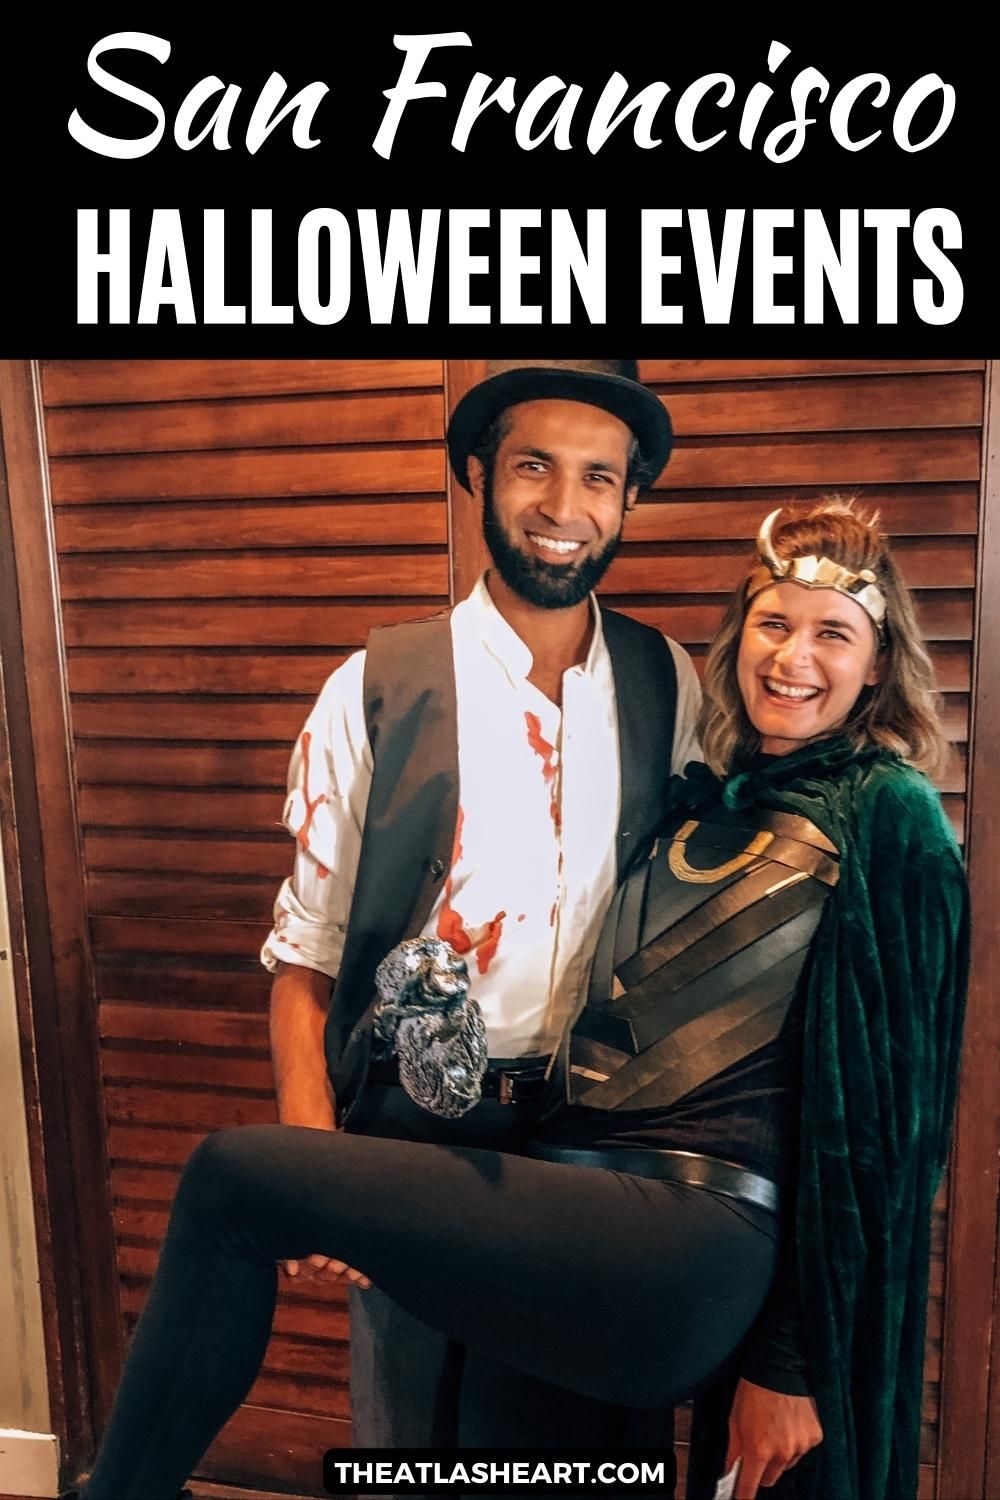 A happy couple in Halloween Costumes poses in front of a wooden closet door, with the text overlay, "San Francisco Halloween Events."